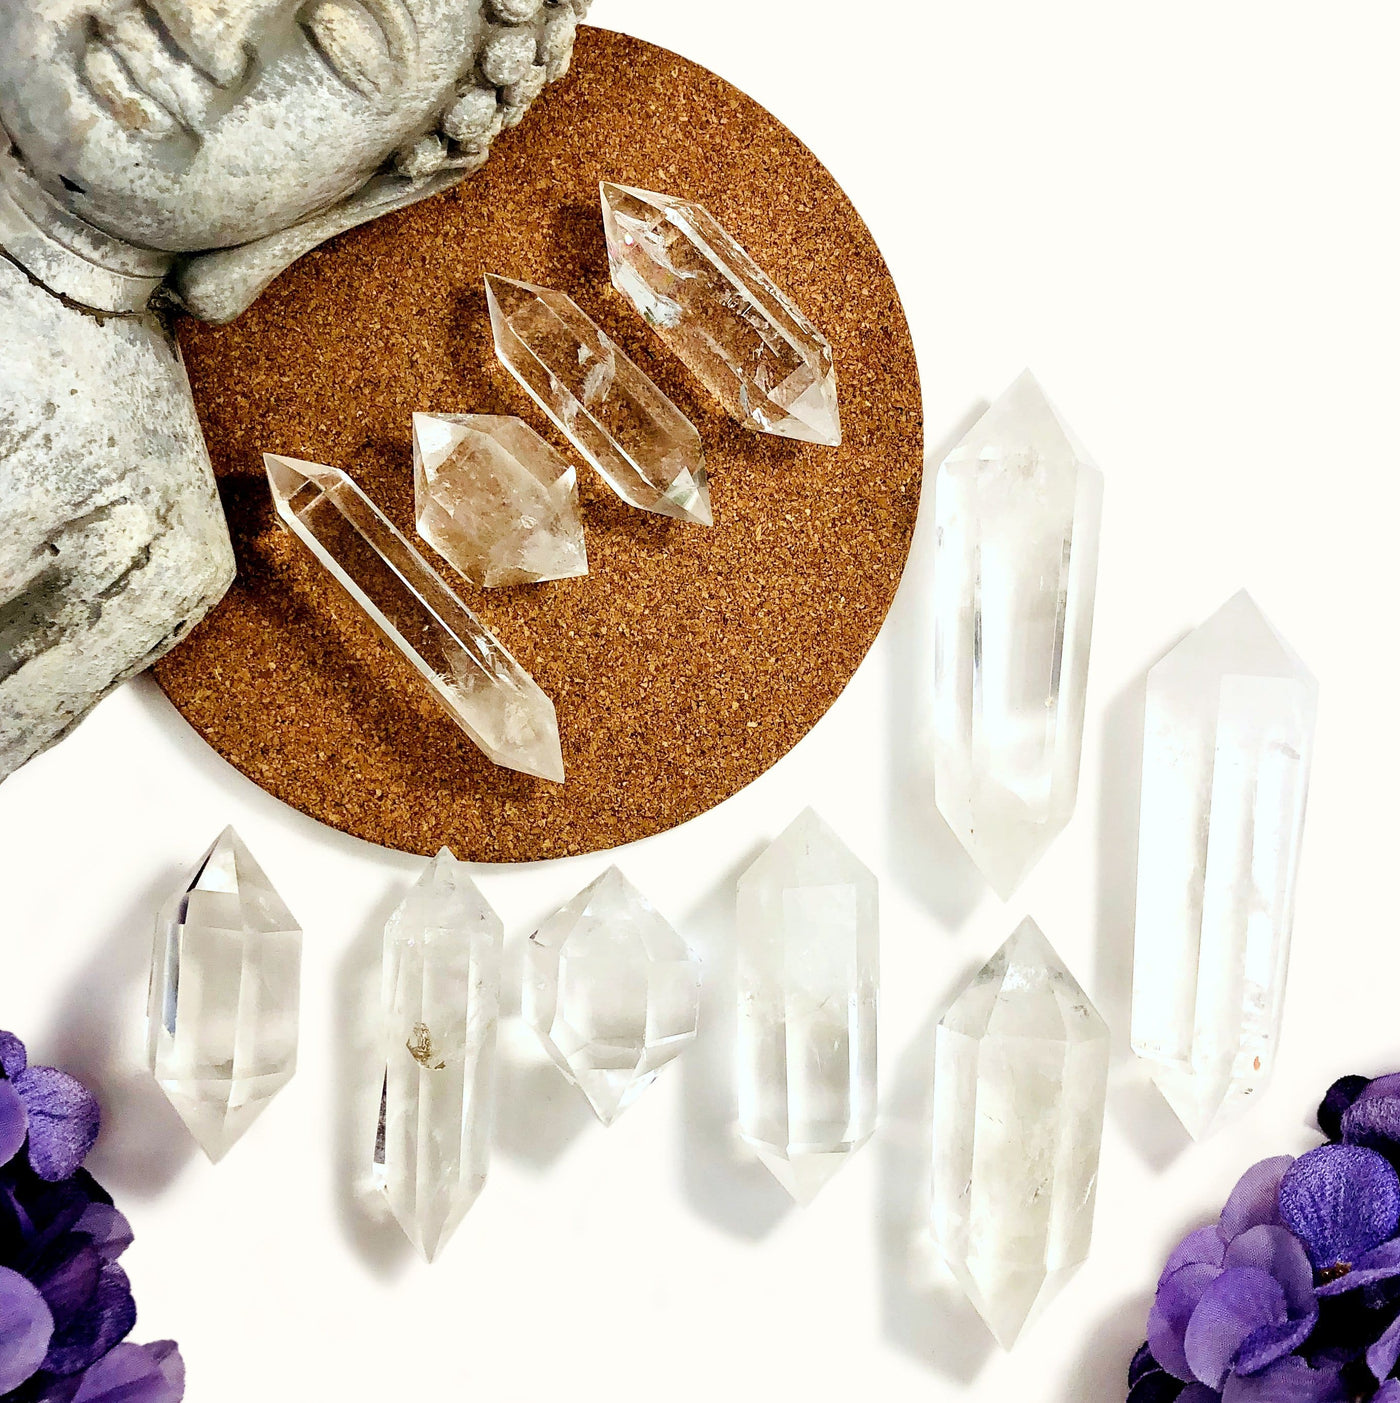 Crystal Quartz Double Terminated Points layed out on a table showing different sizes